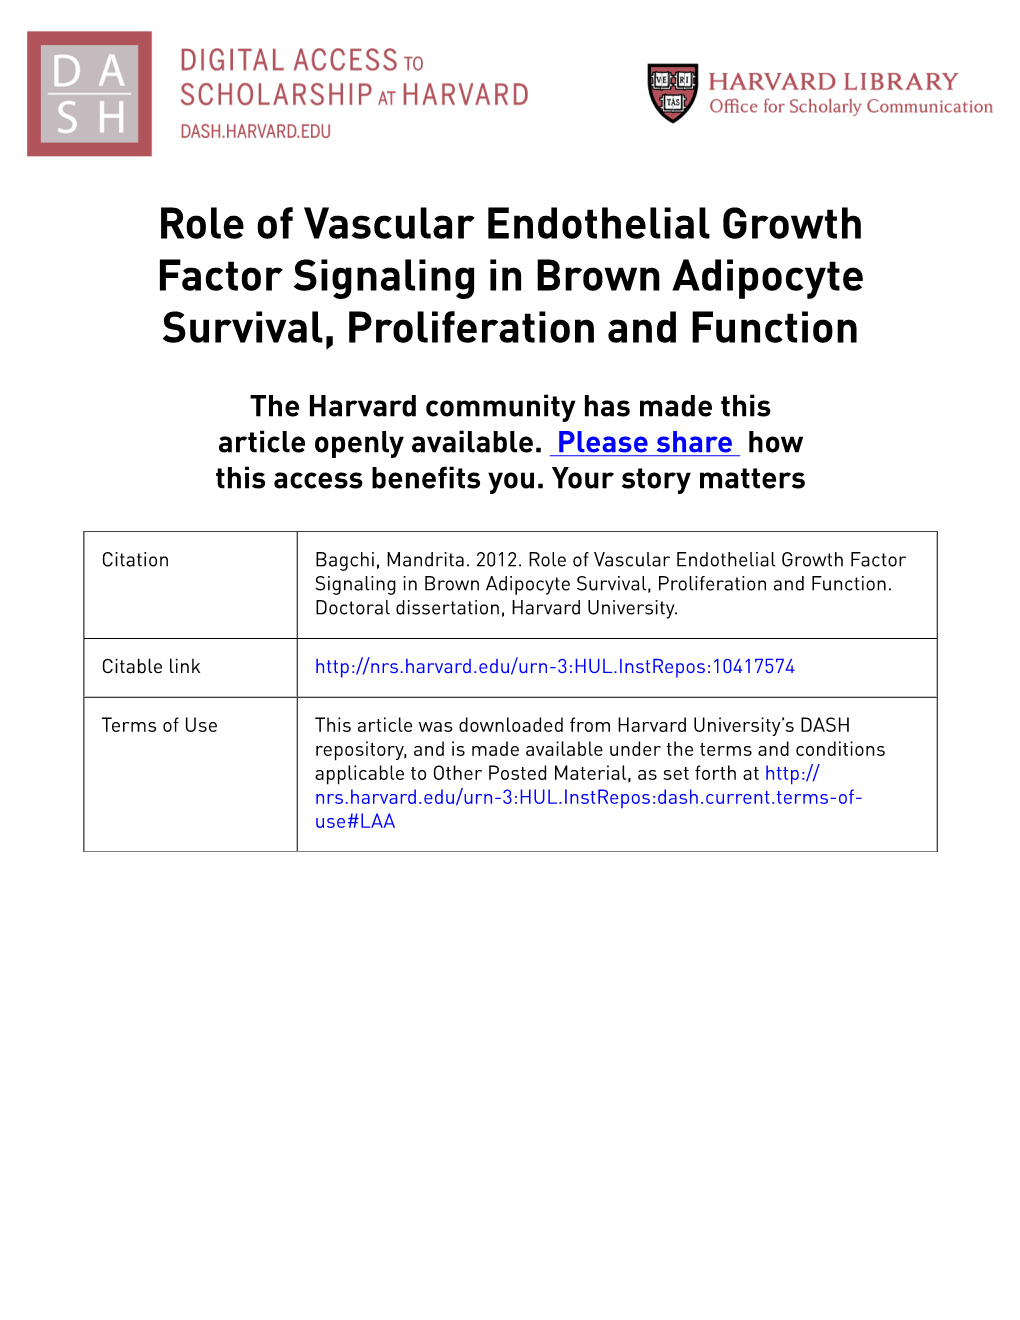 Role of Vascular Endothelial Growth Factor Signaling in Brown Adipocyte Survival, Proliferation and Function